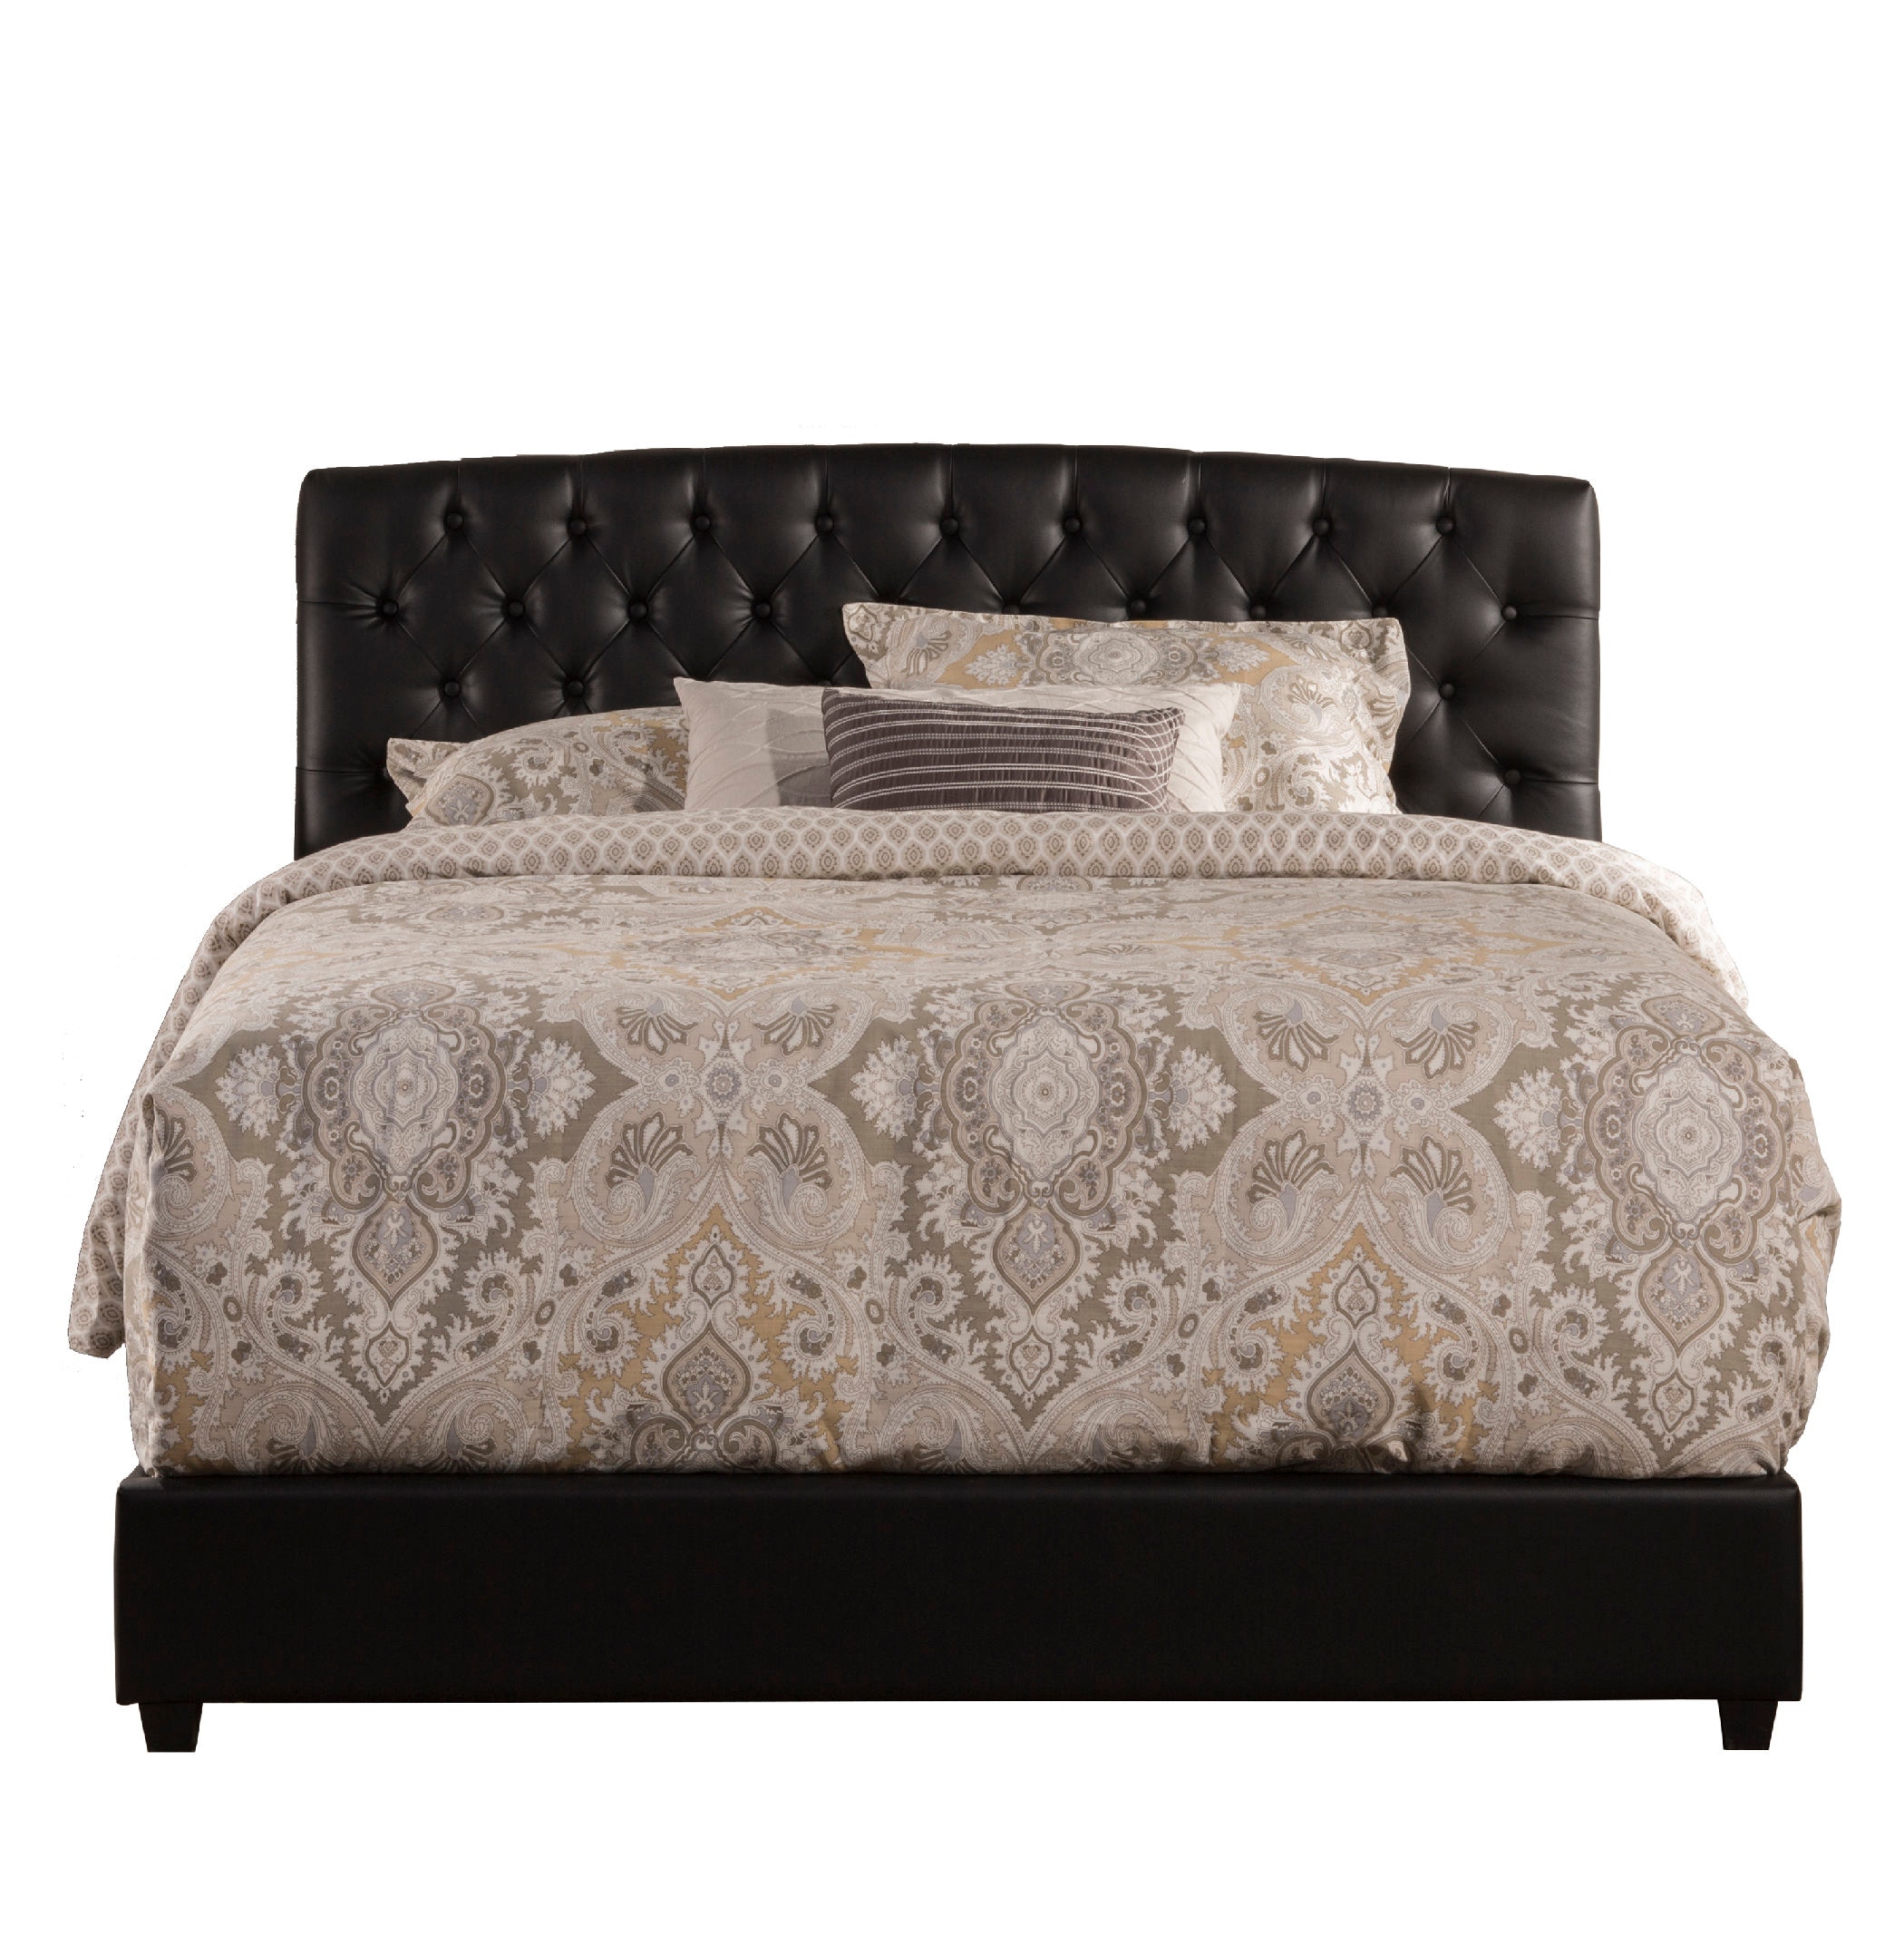 california king bed sets on sale